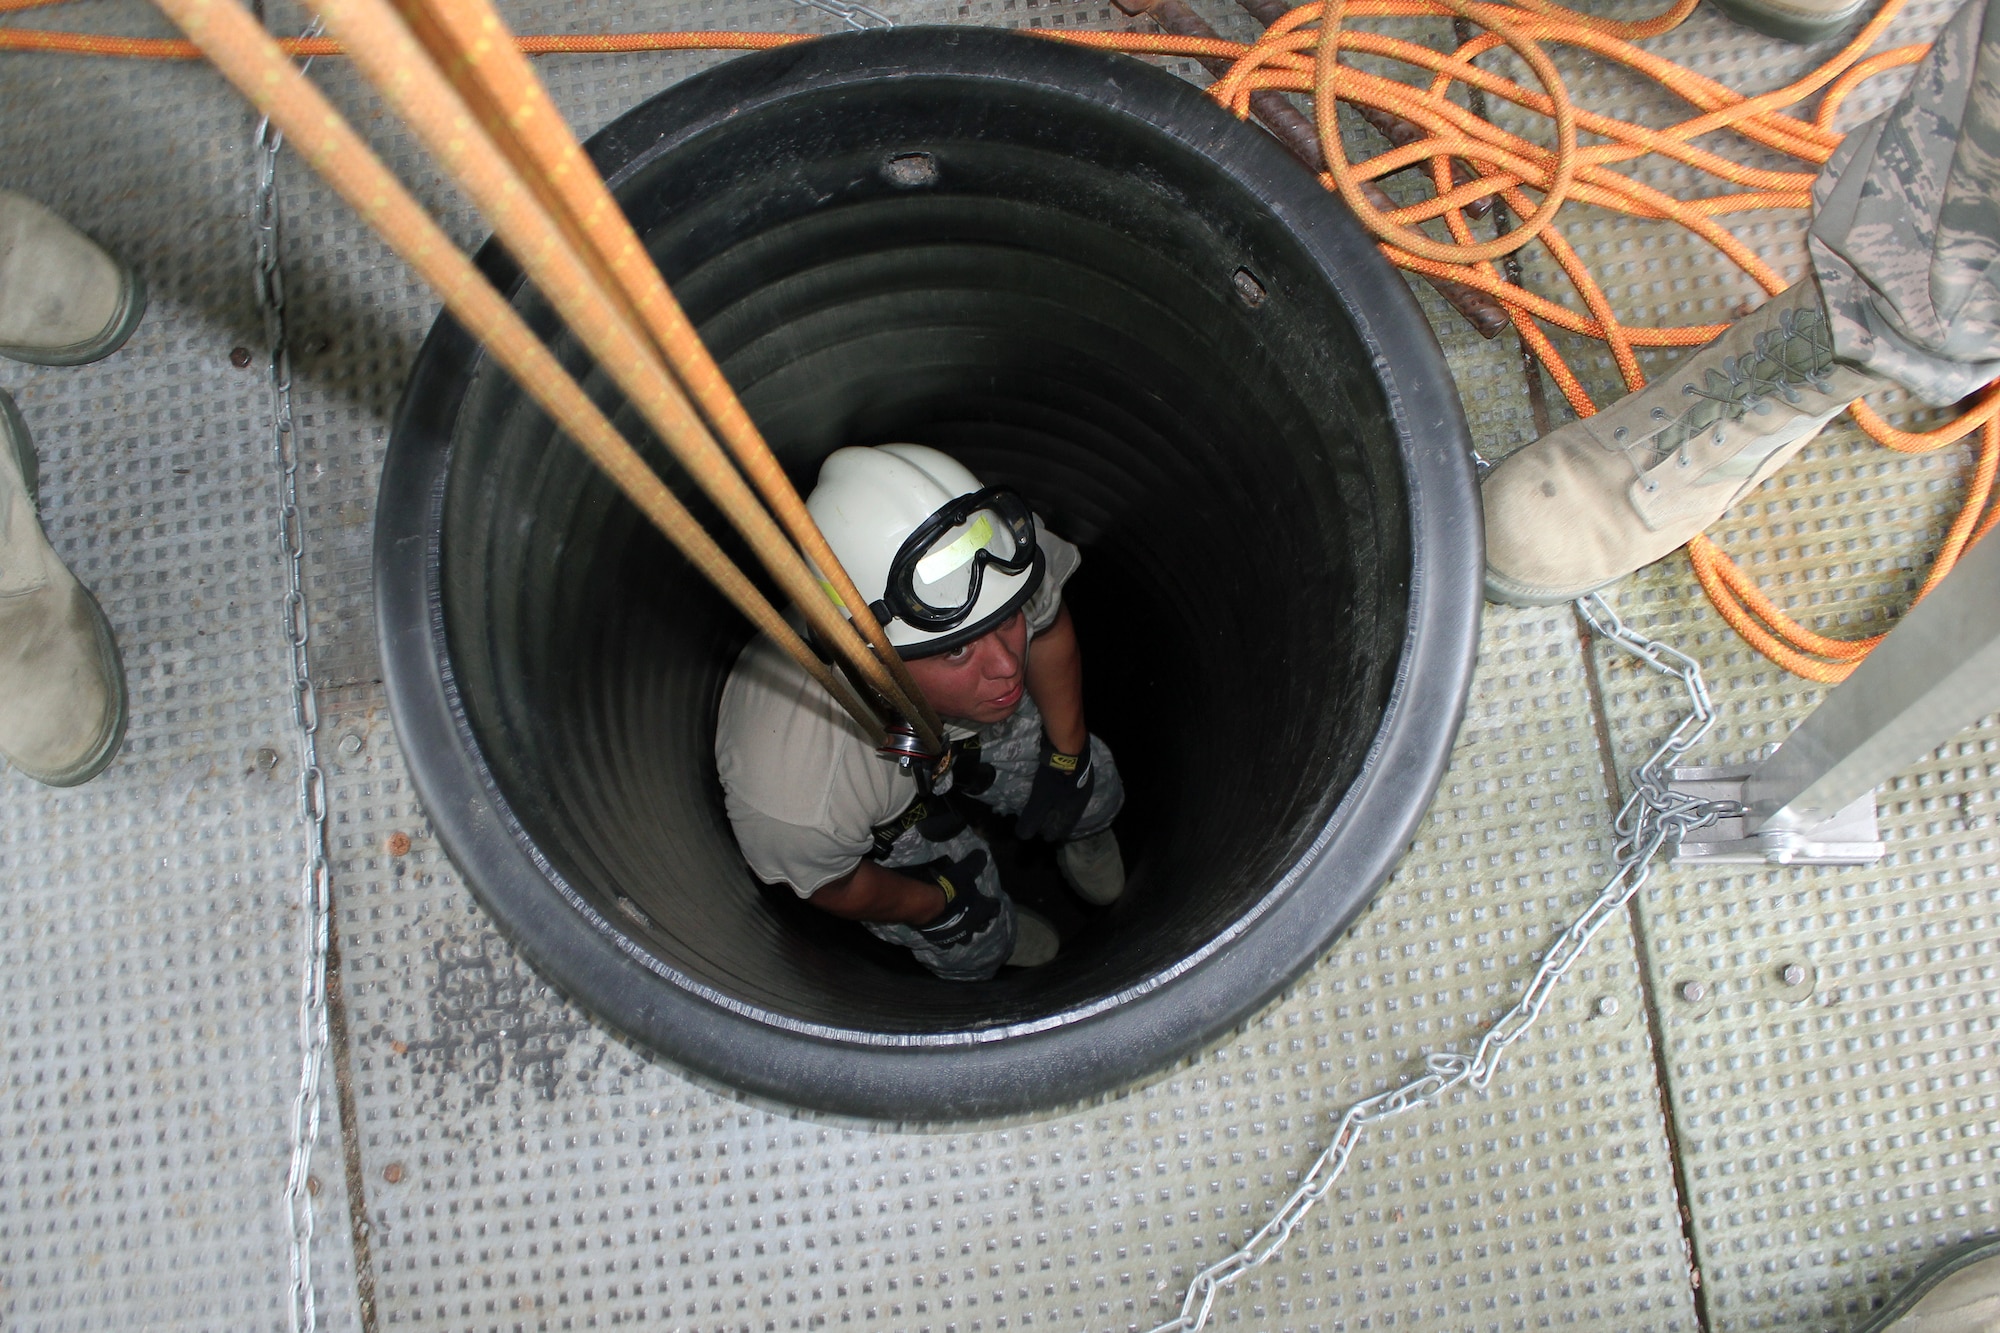 Staff Sgt. Nate Grys is lowered into a large pipe during a confined space exercise conducted by the firefighters of the 179th Airlift Wing, Ohio Air National Guard, during a training deployment to the Alpena Combat Readiness Training Center, Mich., Aug. 20, 2014. The firefighters spent a week at Alpena, training on live-fire exercises involving a simulated structure fire and aircraft fire, and on various rescue scenarios. (U.S. Air National Guard photo by Tech. Sgt. Dan Heaton)